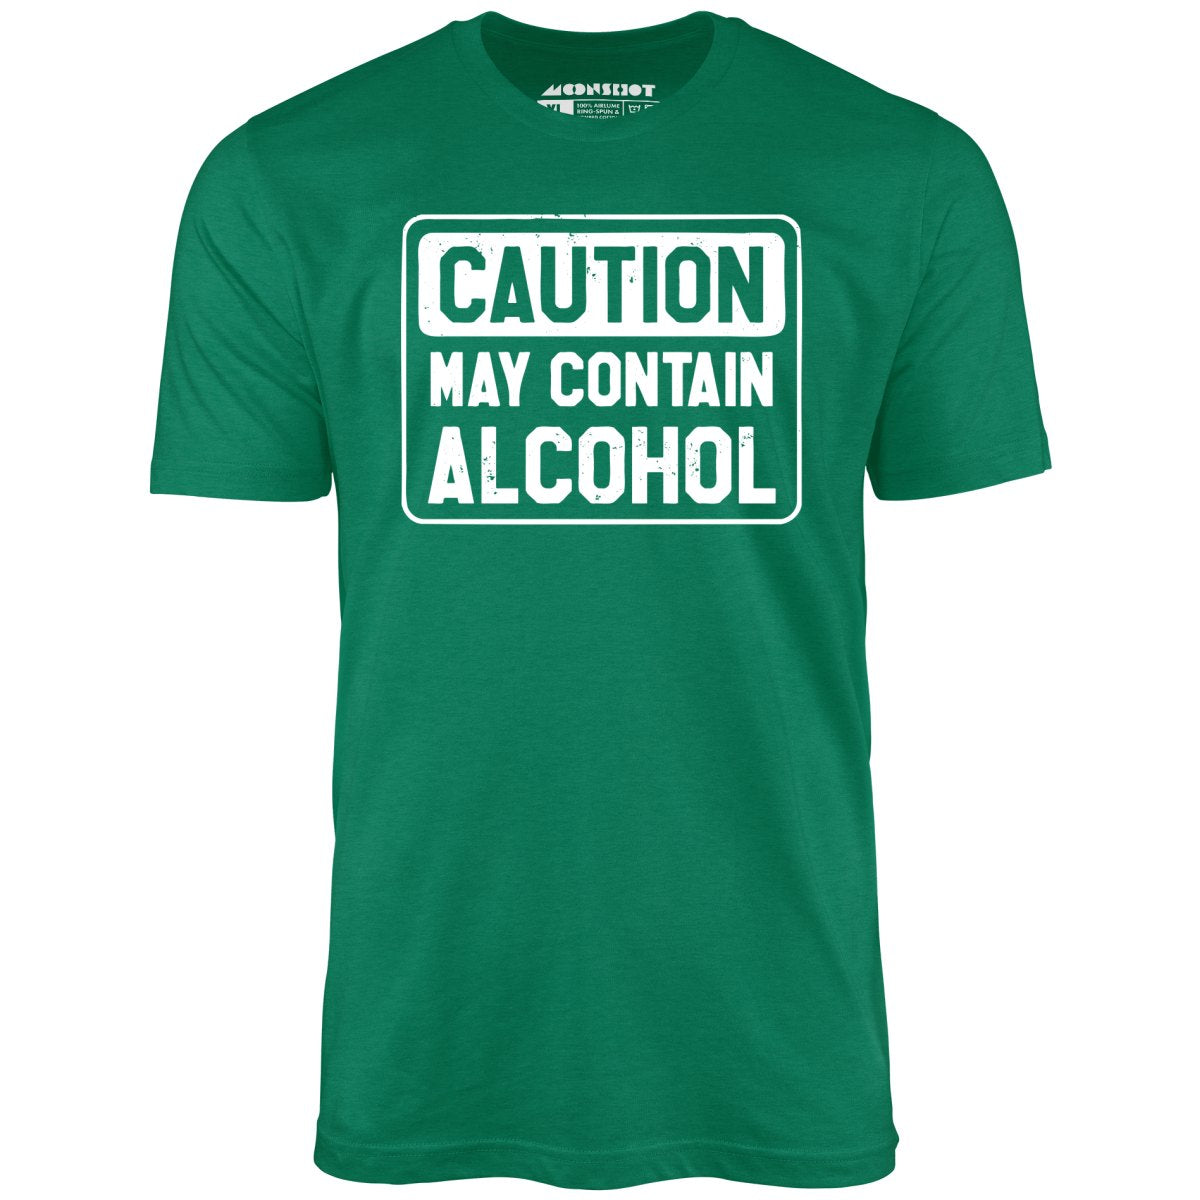 Caution May Contain Alcohol - Unisex T-Shirt